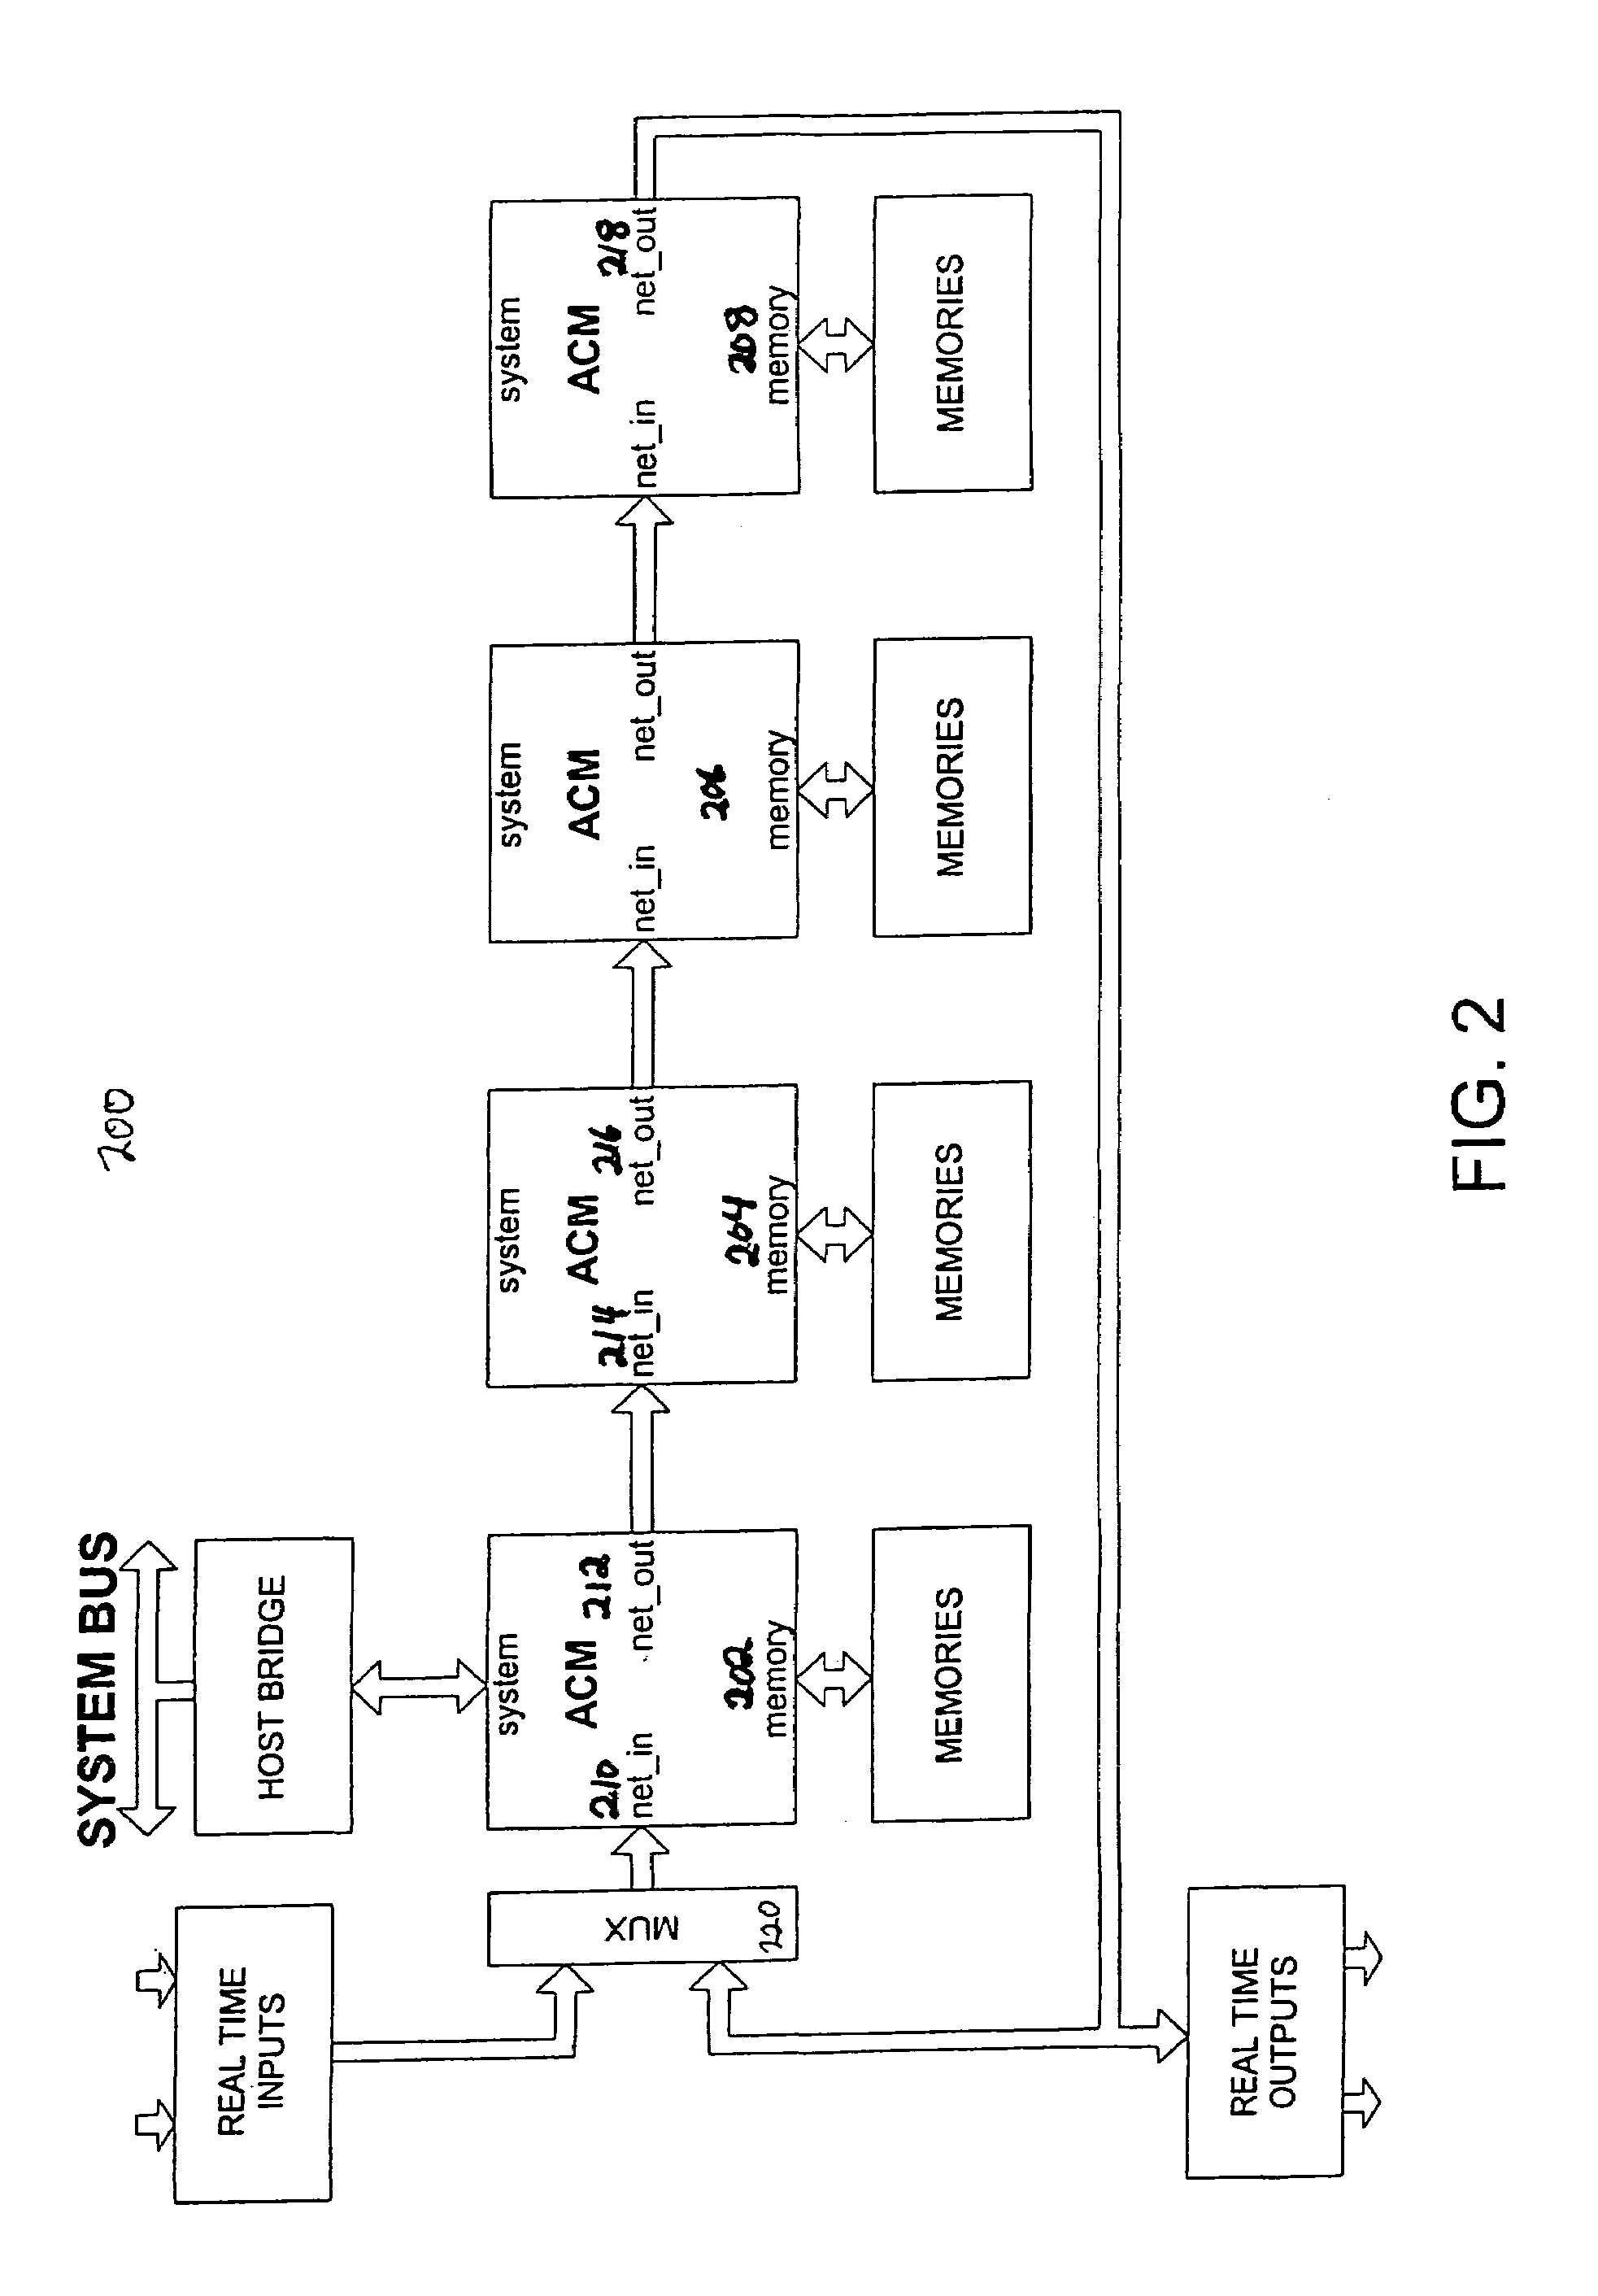 Cache for instruction set architecture using indexes to achieve compression